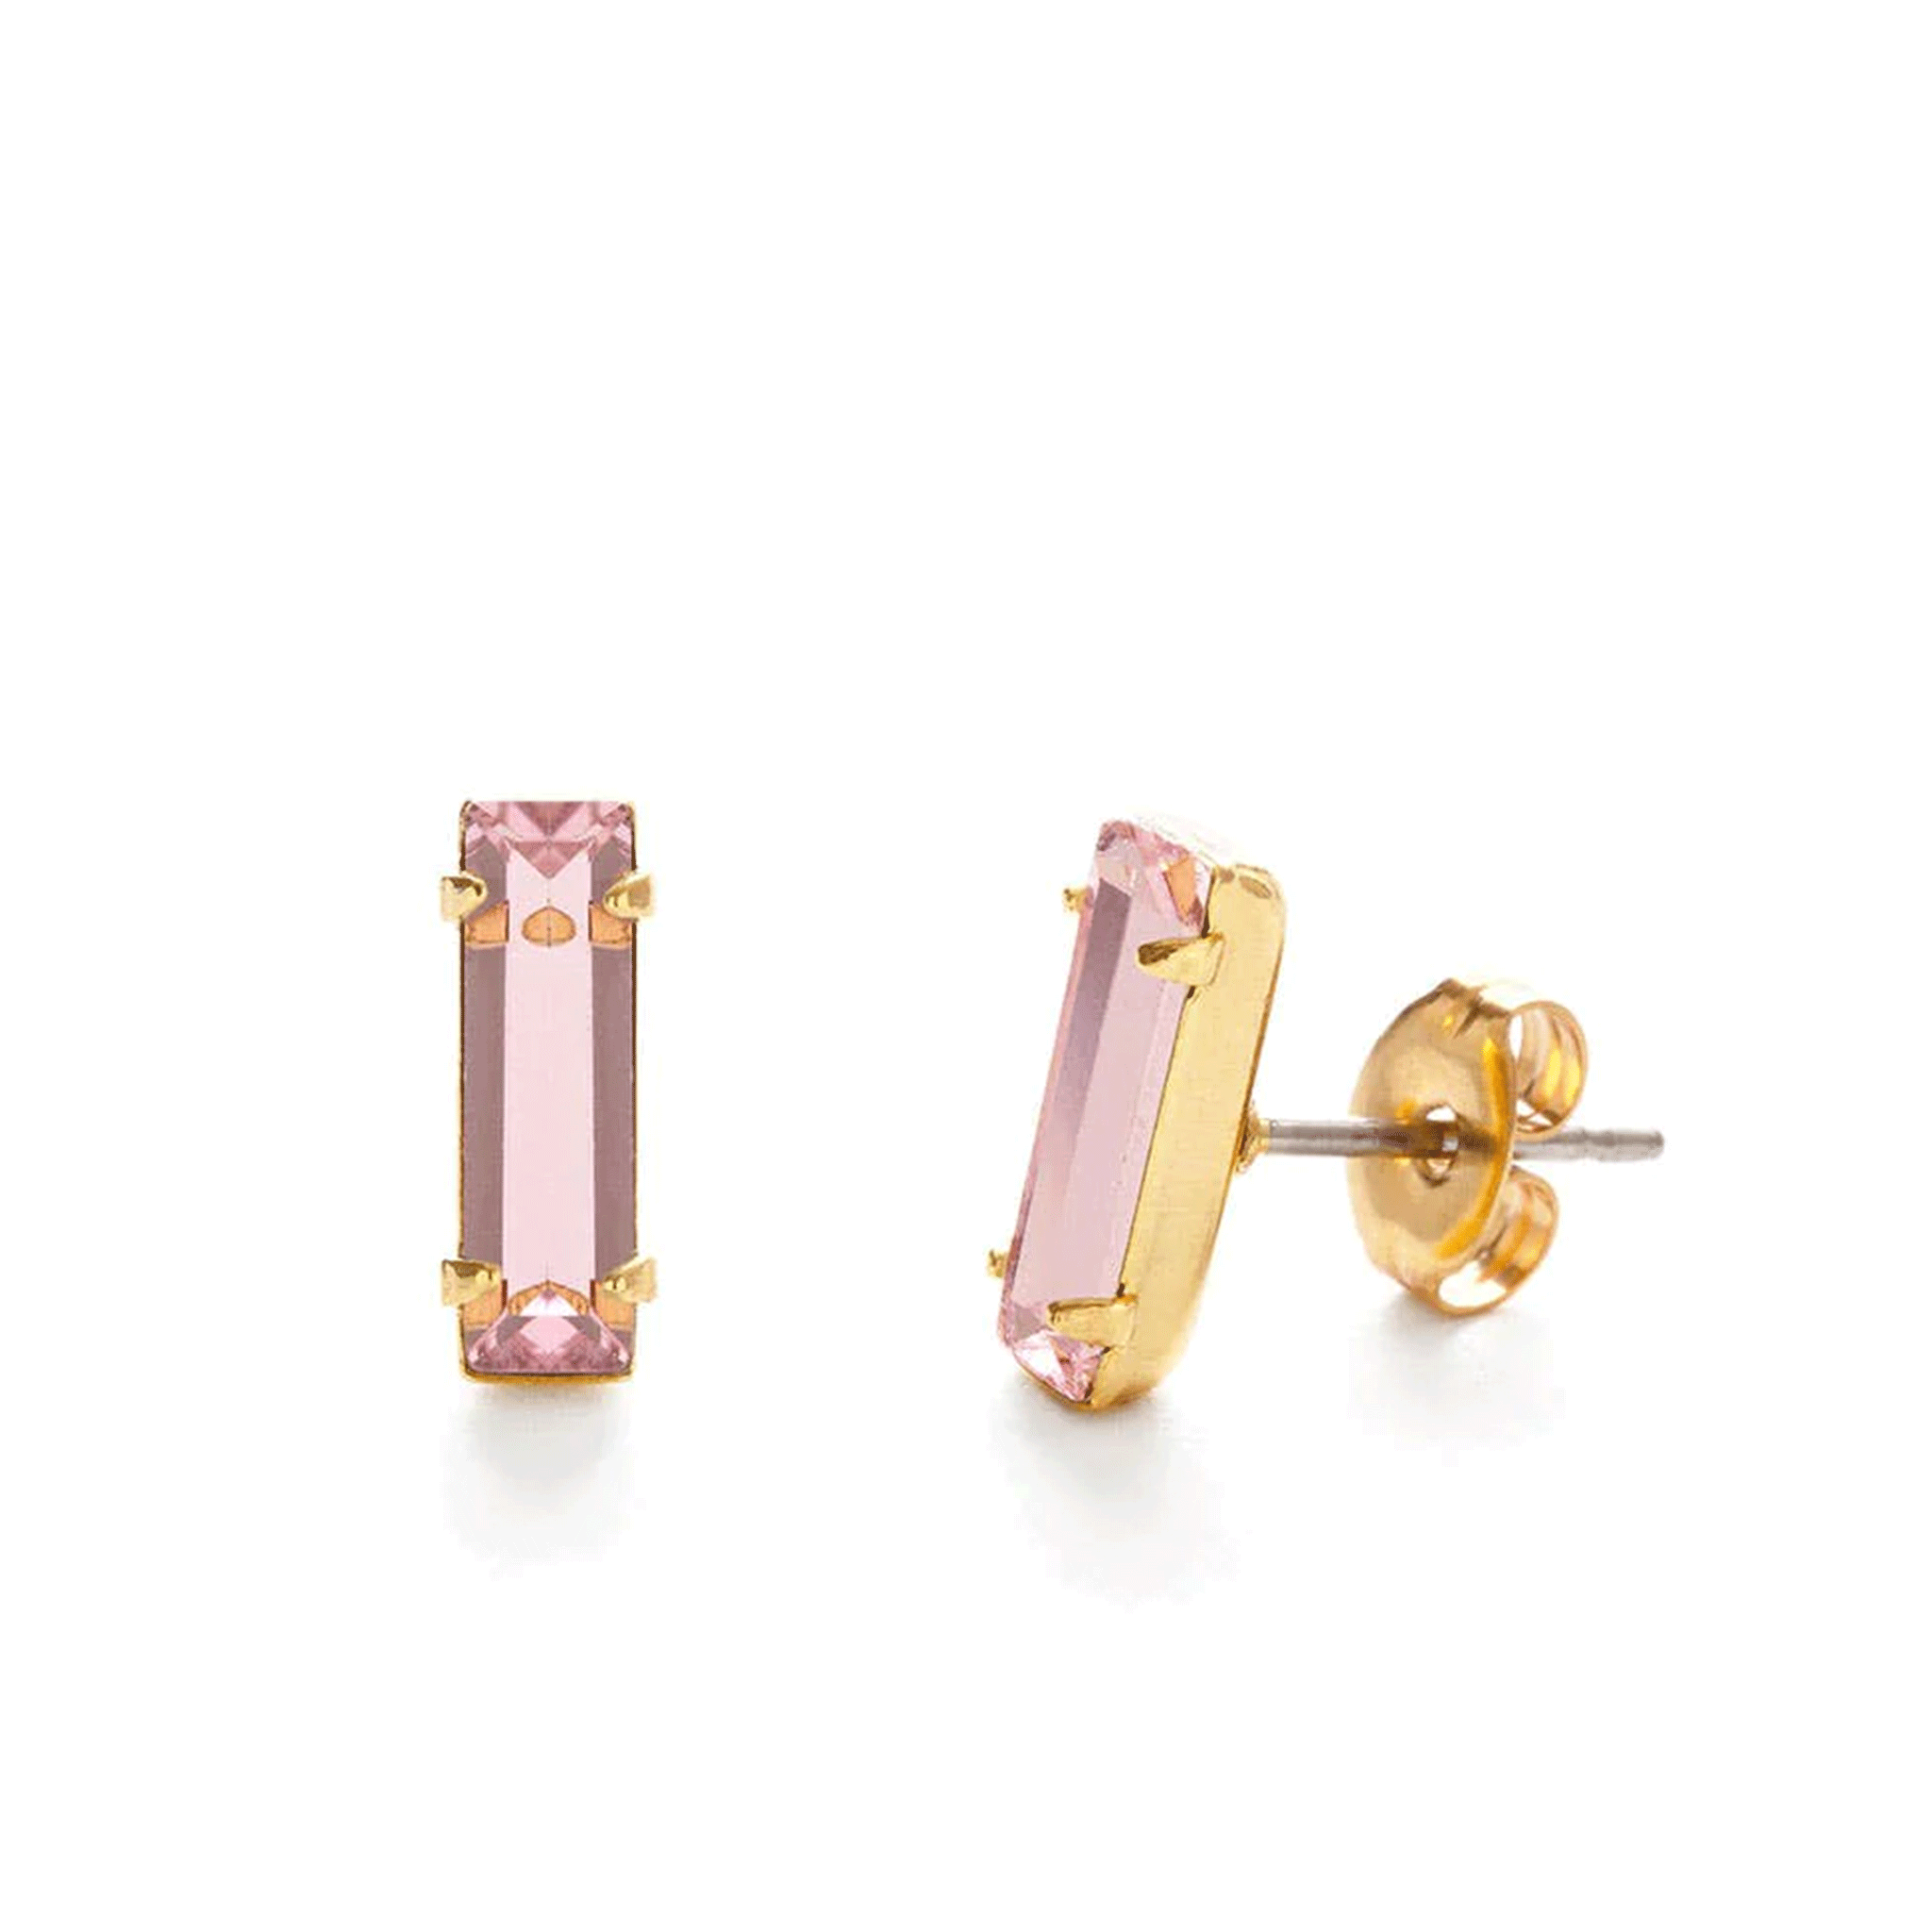 On a white background is a gold plated of pair of baguette stud earrings with a pink stone in the center. 